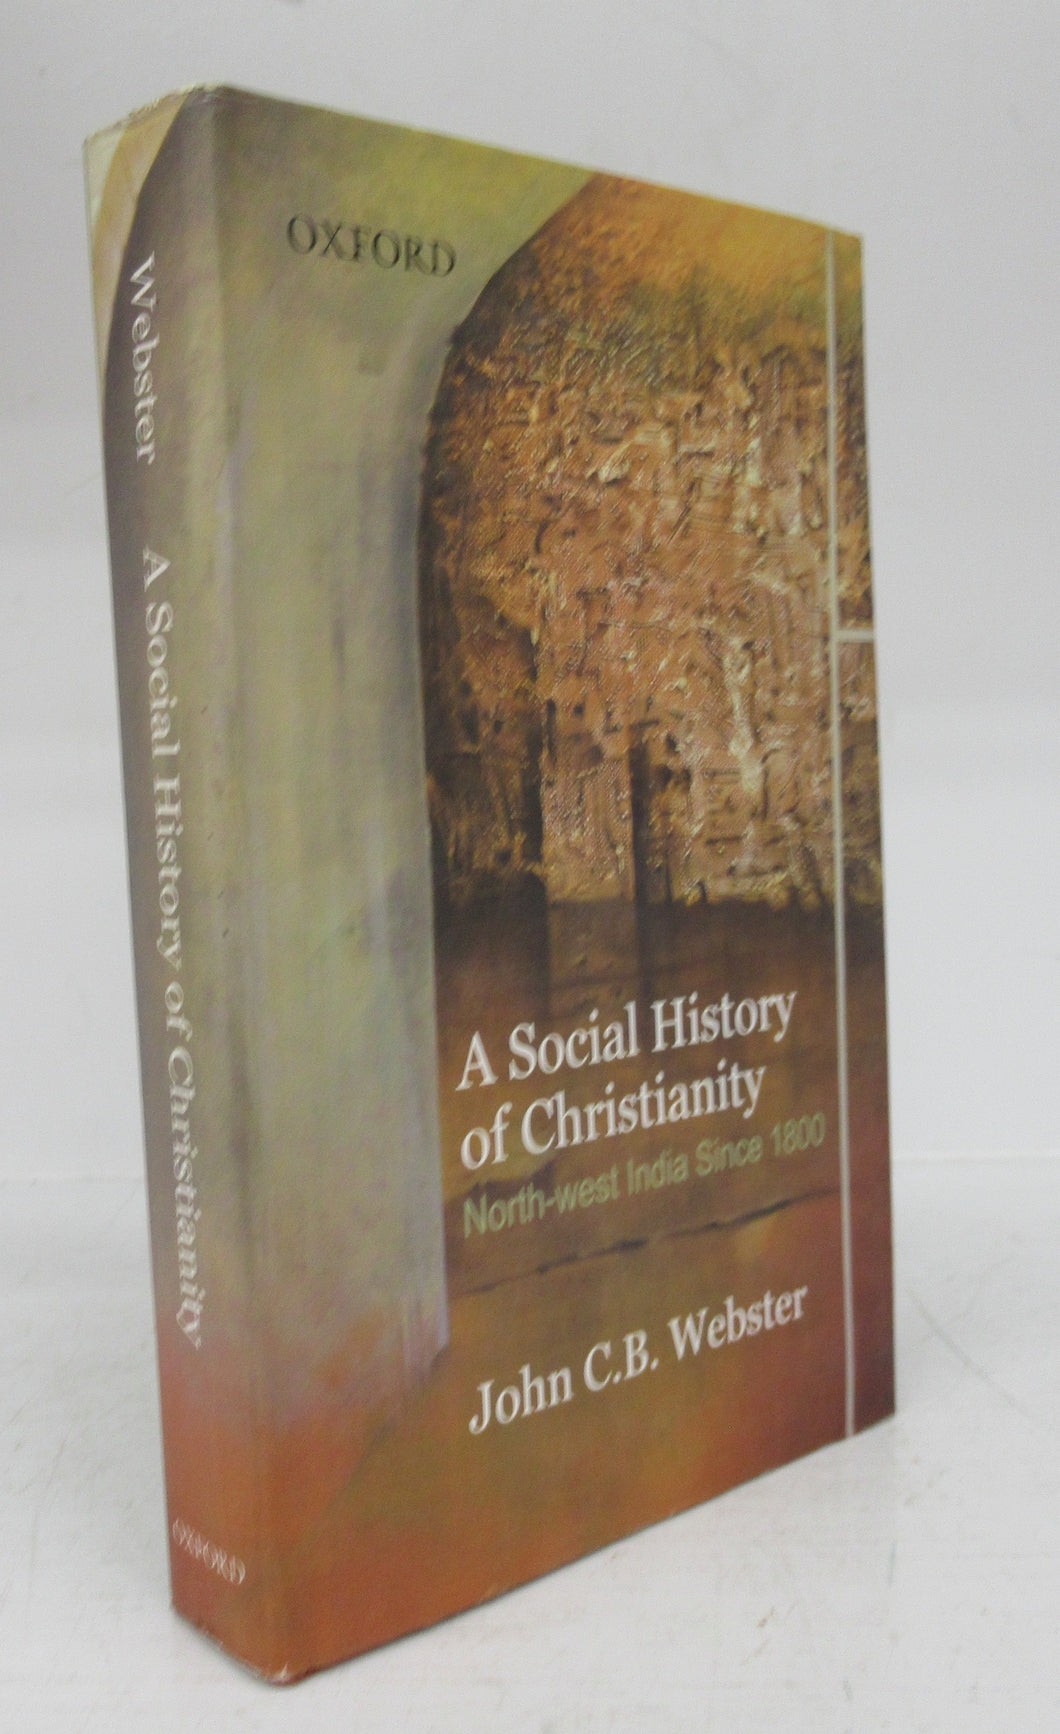 A Social History of Christianity: North-west Indian Since 1800